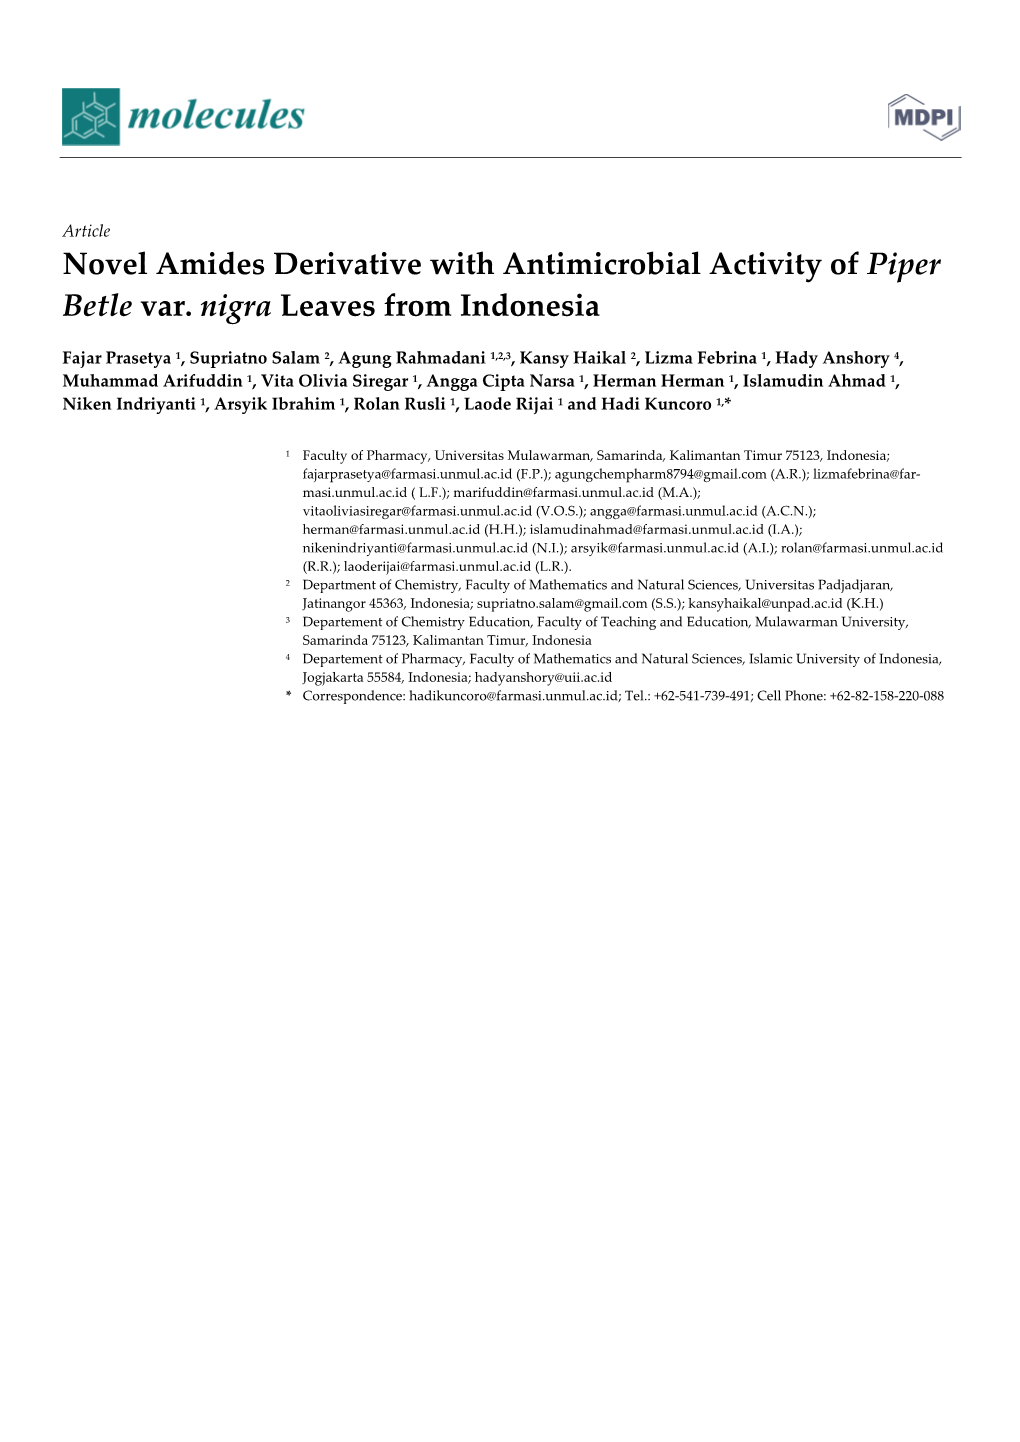 Novel Amides Derivative with Antimicrobial Activity of Piper Betle Var. Nigra Leaves from Indonesia